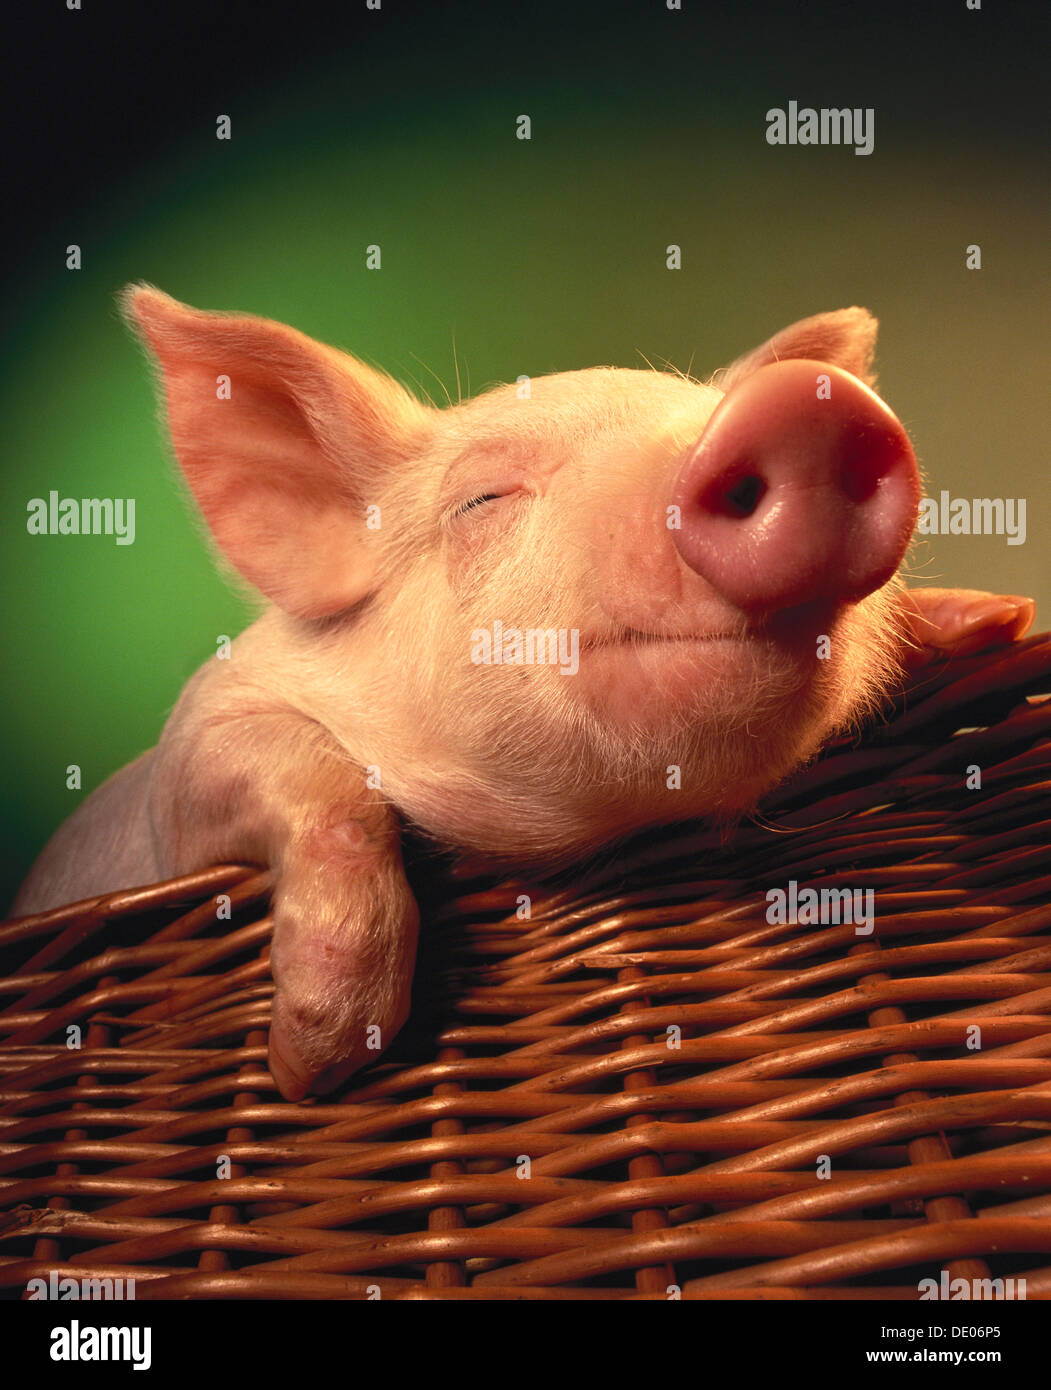 Piglet in a basket Stock Photo